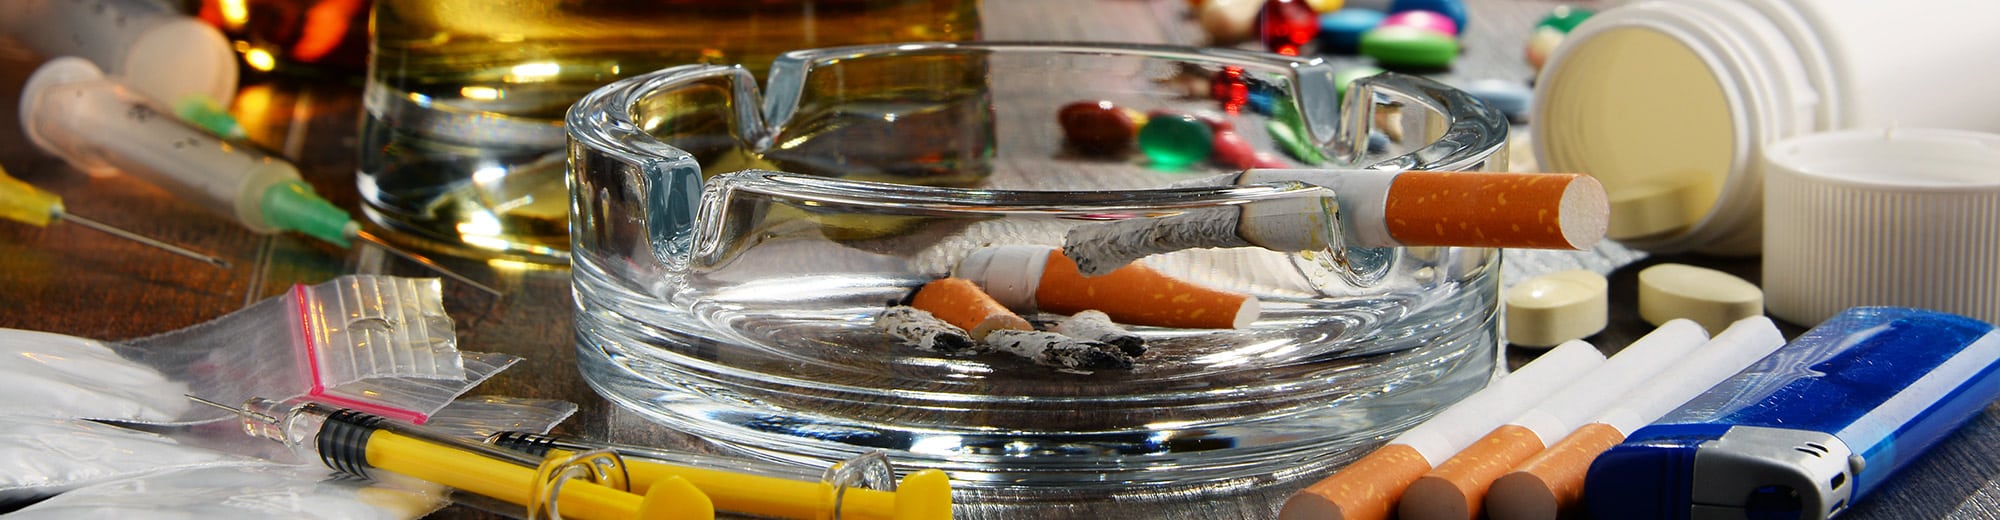 Ashtray with many cigarette butts in it and one lit cigarette resting on edge with cigs, lighters, syringes, pills, pill bottles in the background